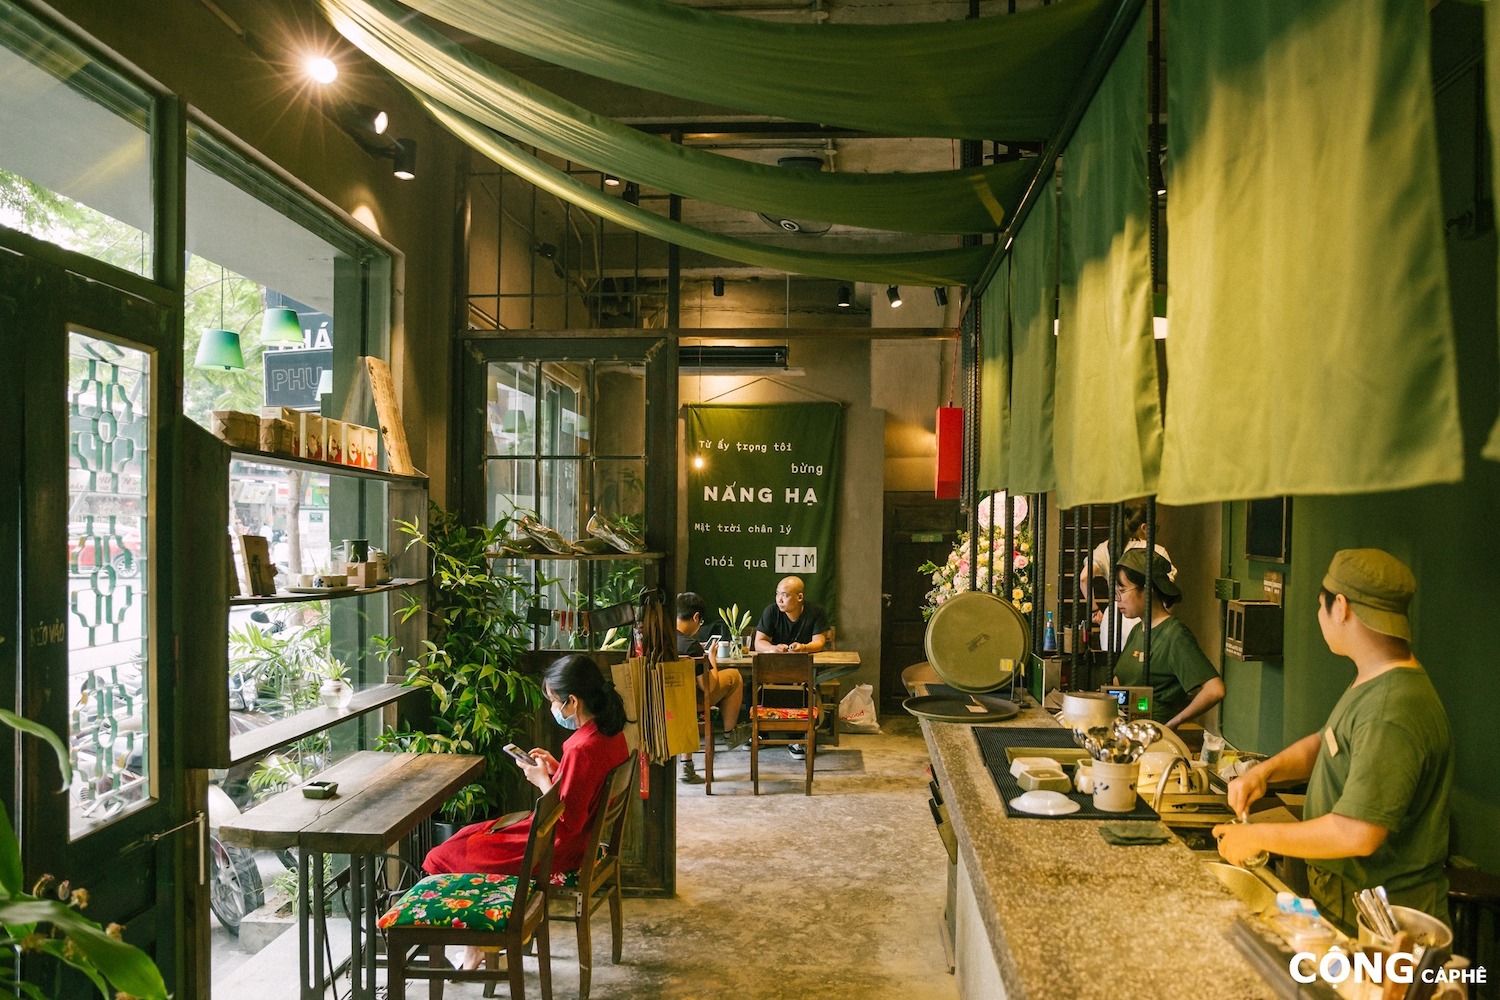 Cong Caphe isn't just a renowned coffee chain in Vietnam but also an icon steeped in the nation's culture